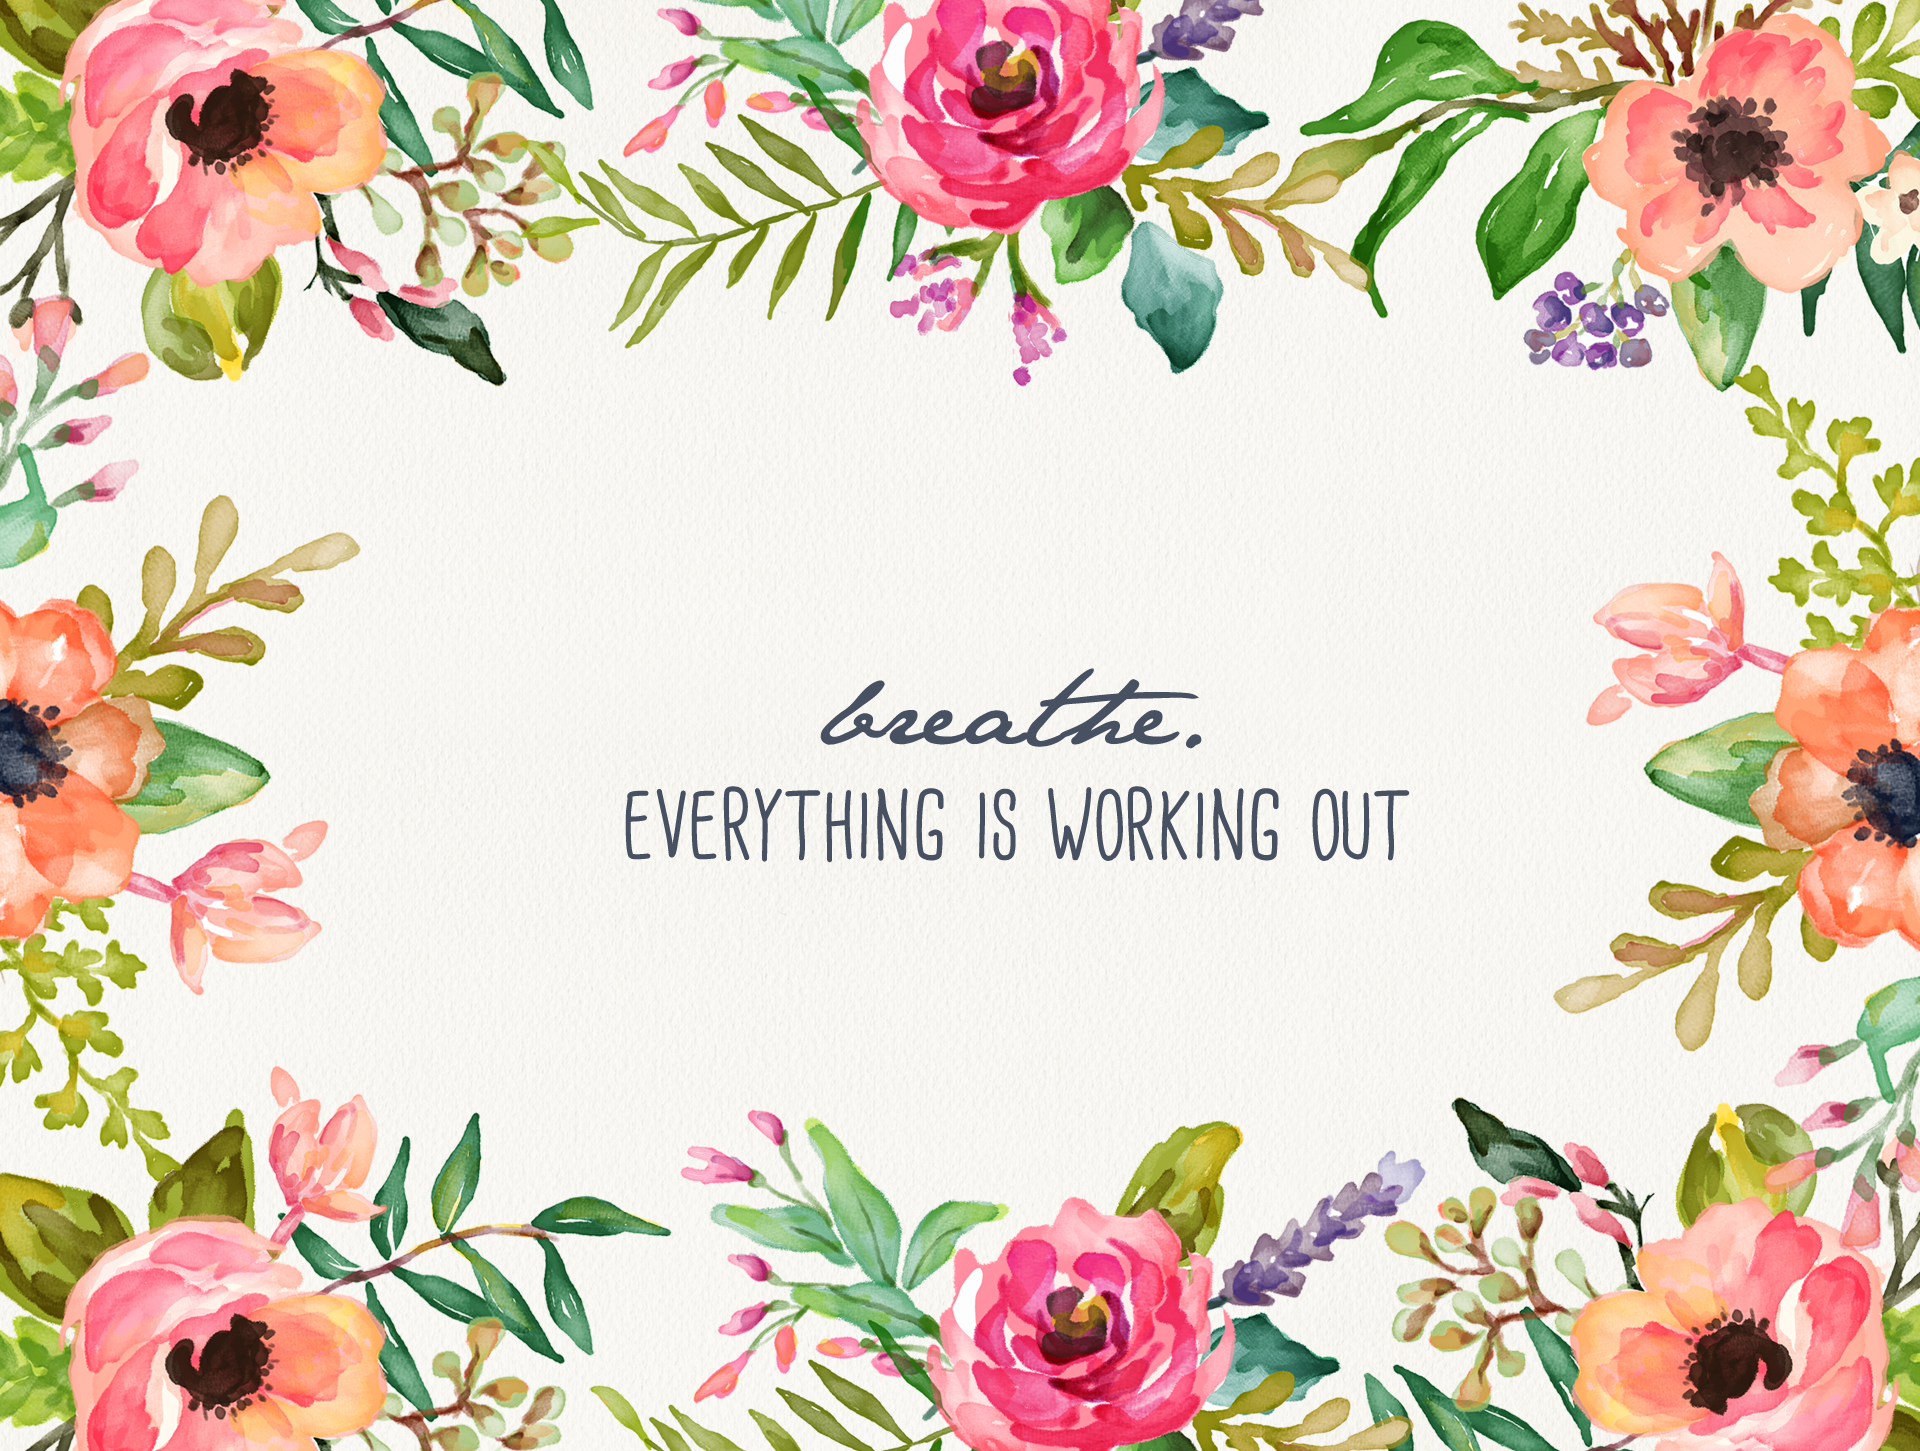 Breathe - Floral Desktop Wallpaper - Inspired by Beatrice Clay